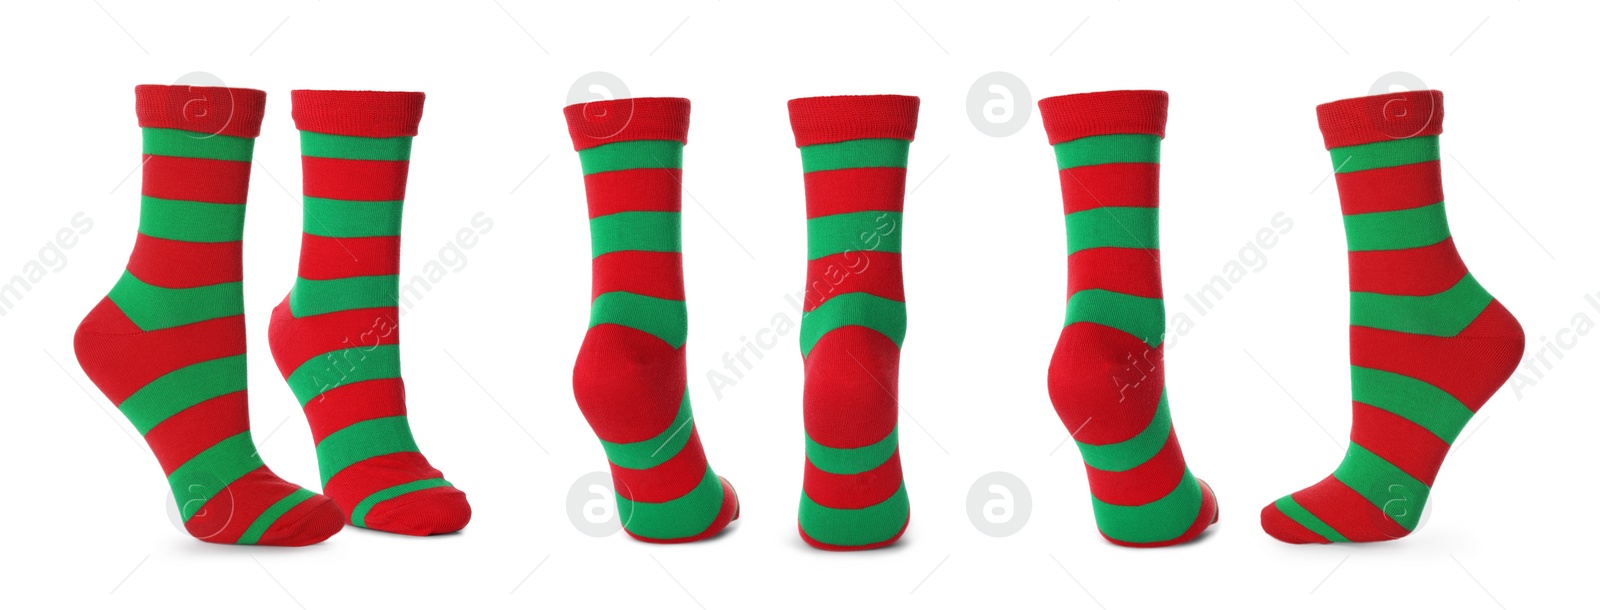 Image of Pairs of bright striped socks on white background, collage. Banner design